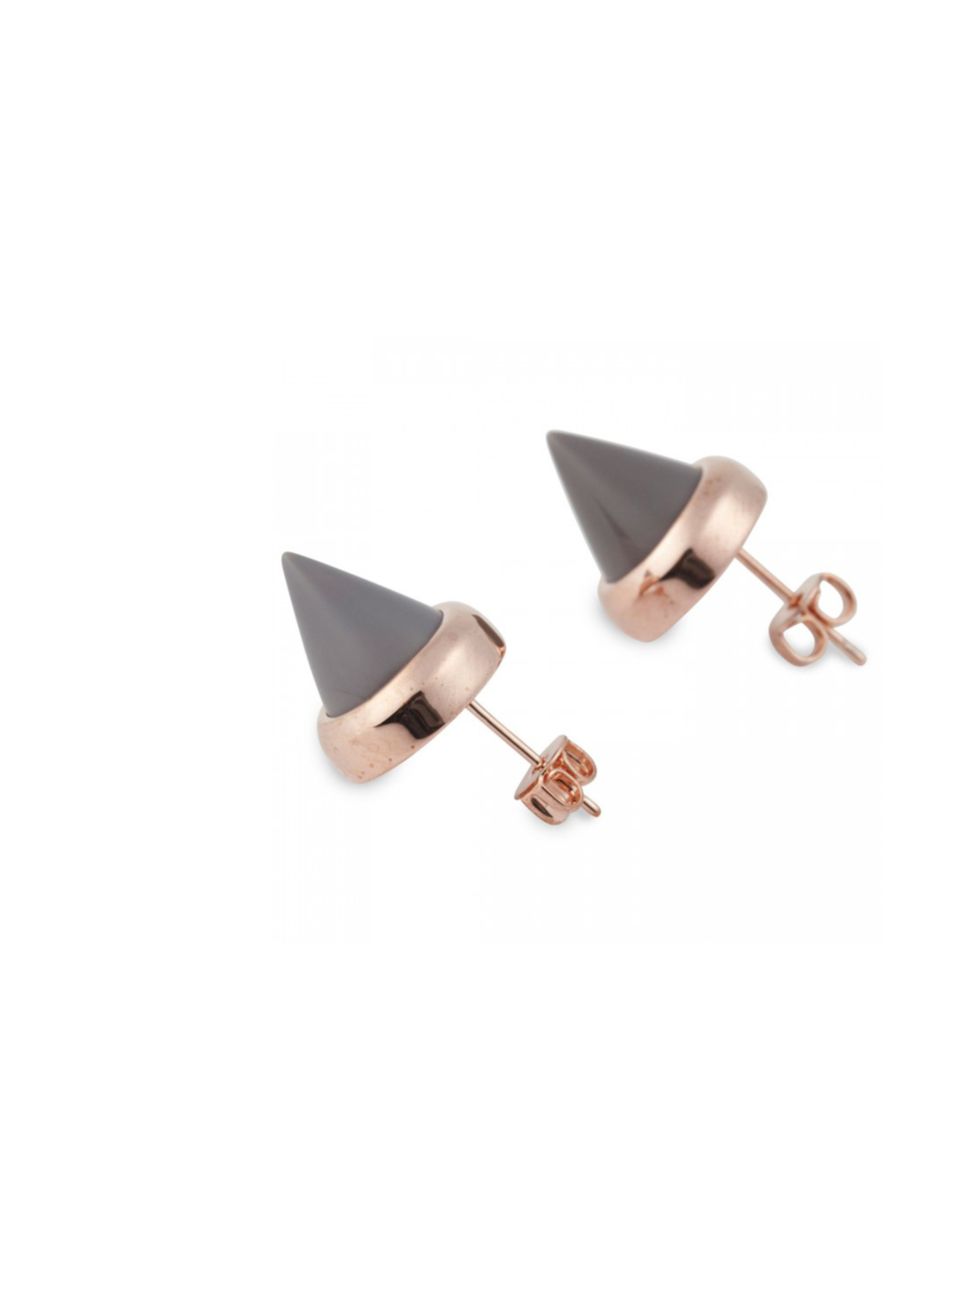 <p>Sharpen up your new season wardrobe in an instant with these super cool spike studs Eddie Borgo stud earrings, £120, at <a href="http://www.harveynichols.com/womens/categories-1/jewellery/earrings/s417228-cone-stud-earrings.html?colour=GREY+AND+OTHER"